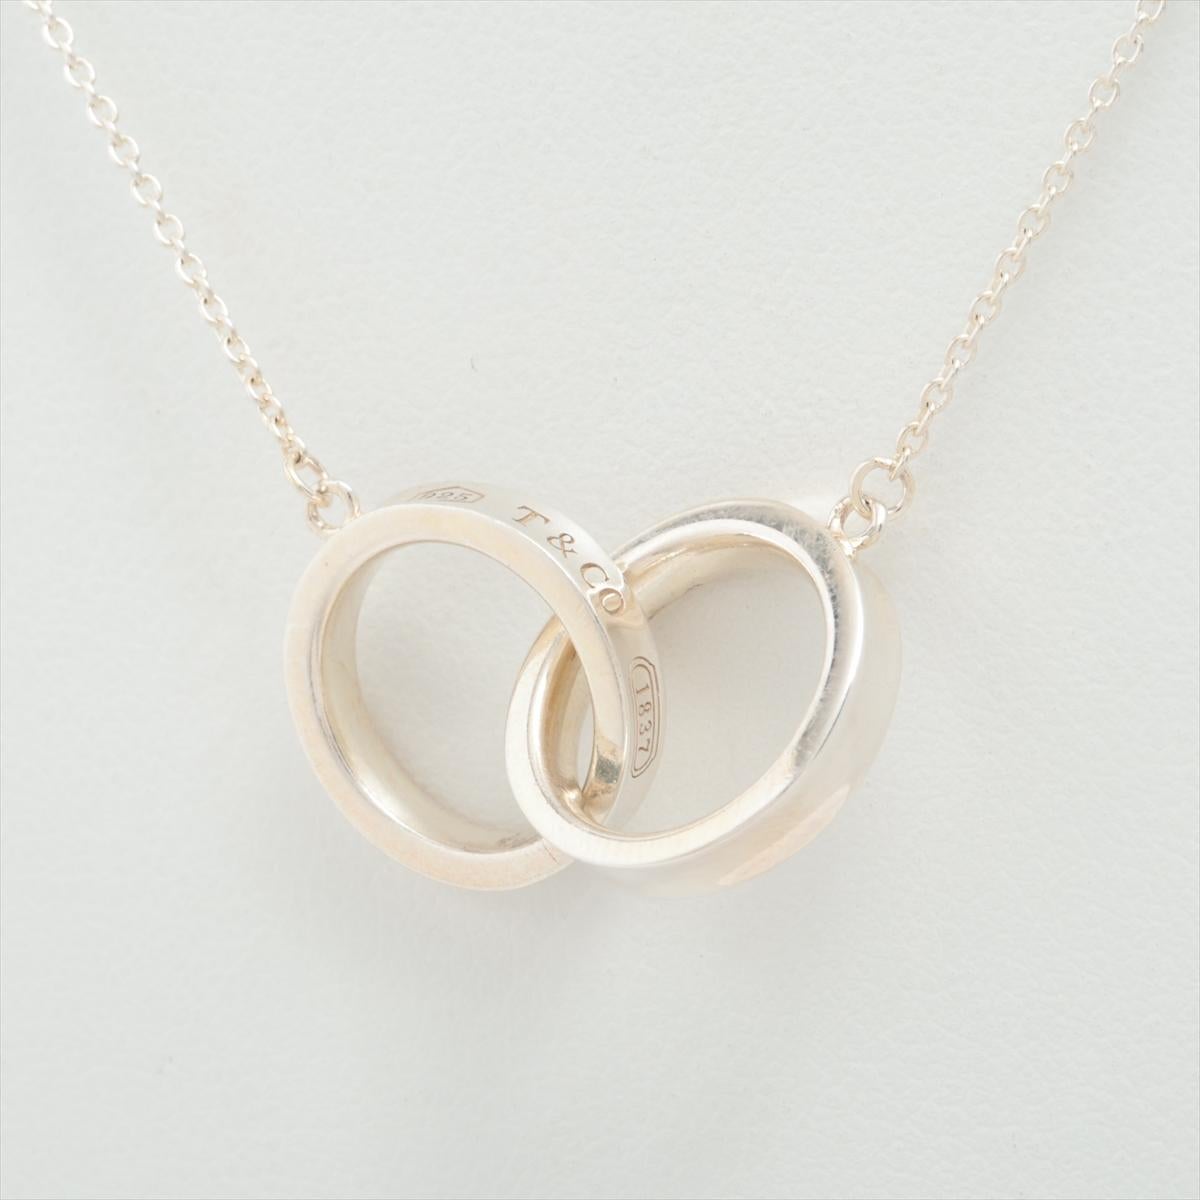 The Tiffany & Co. 1837 Interlocking Circle Necklace in Silver is a sleek and sophisticated accessory that embodies the brand's legacy of timeless elegance. Crafted from high-quality sterling silver, the necklace features two interlocking circles,